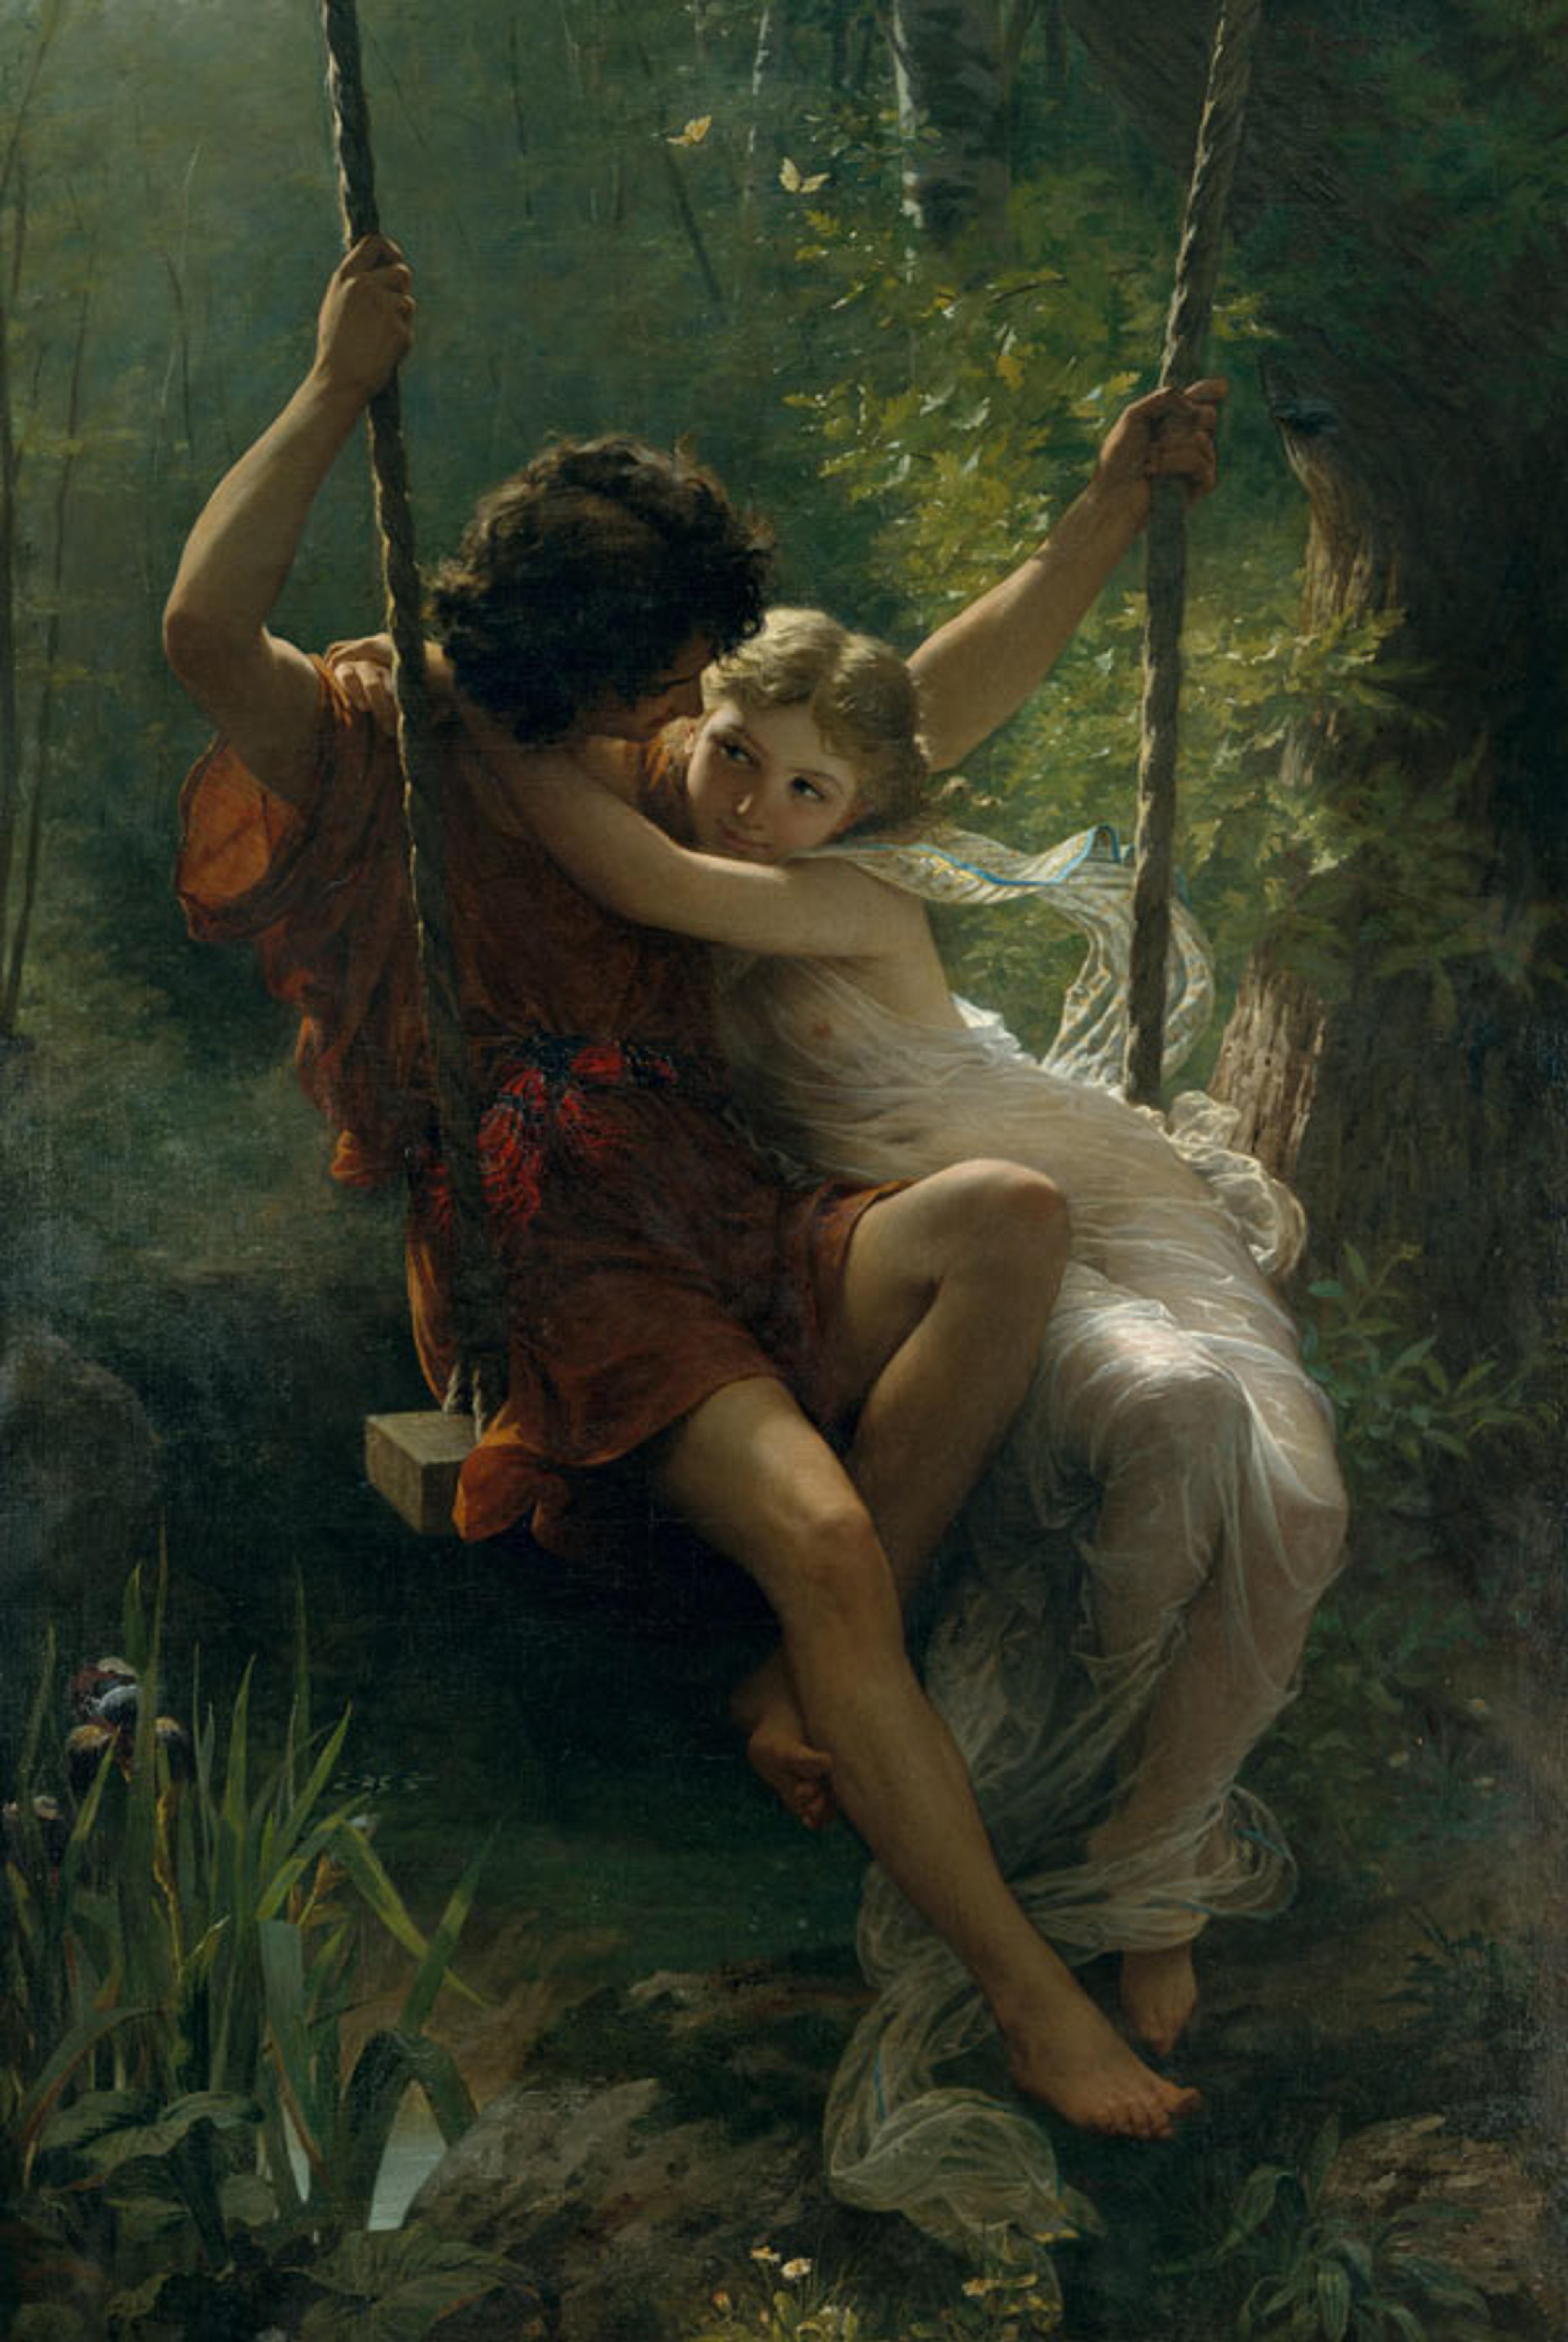 Pierre-Auguste Cot (French, 1837–1883). Springtime, 1873. Oil on canvas; 84 x 50 in. (213.4 x 127 cm). The Metropolitan Museum of Art, New York, Gift of Steven and Alexandra Cohen, 2012 (2012.575)